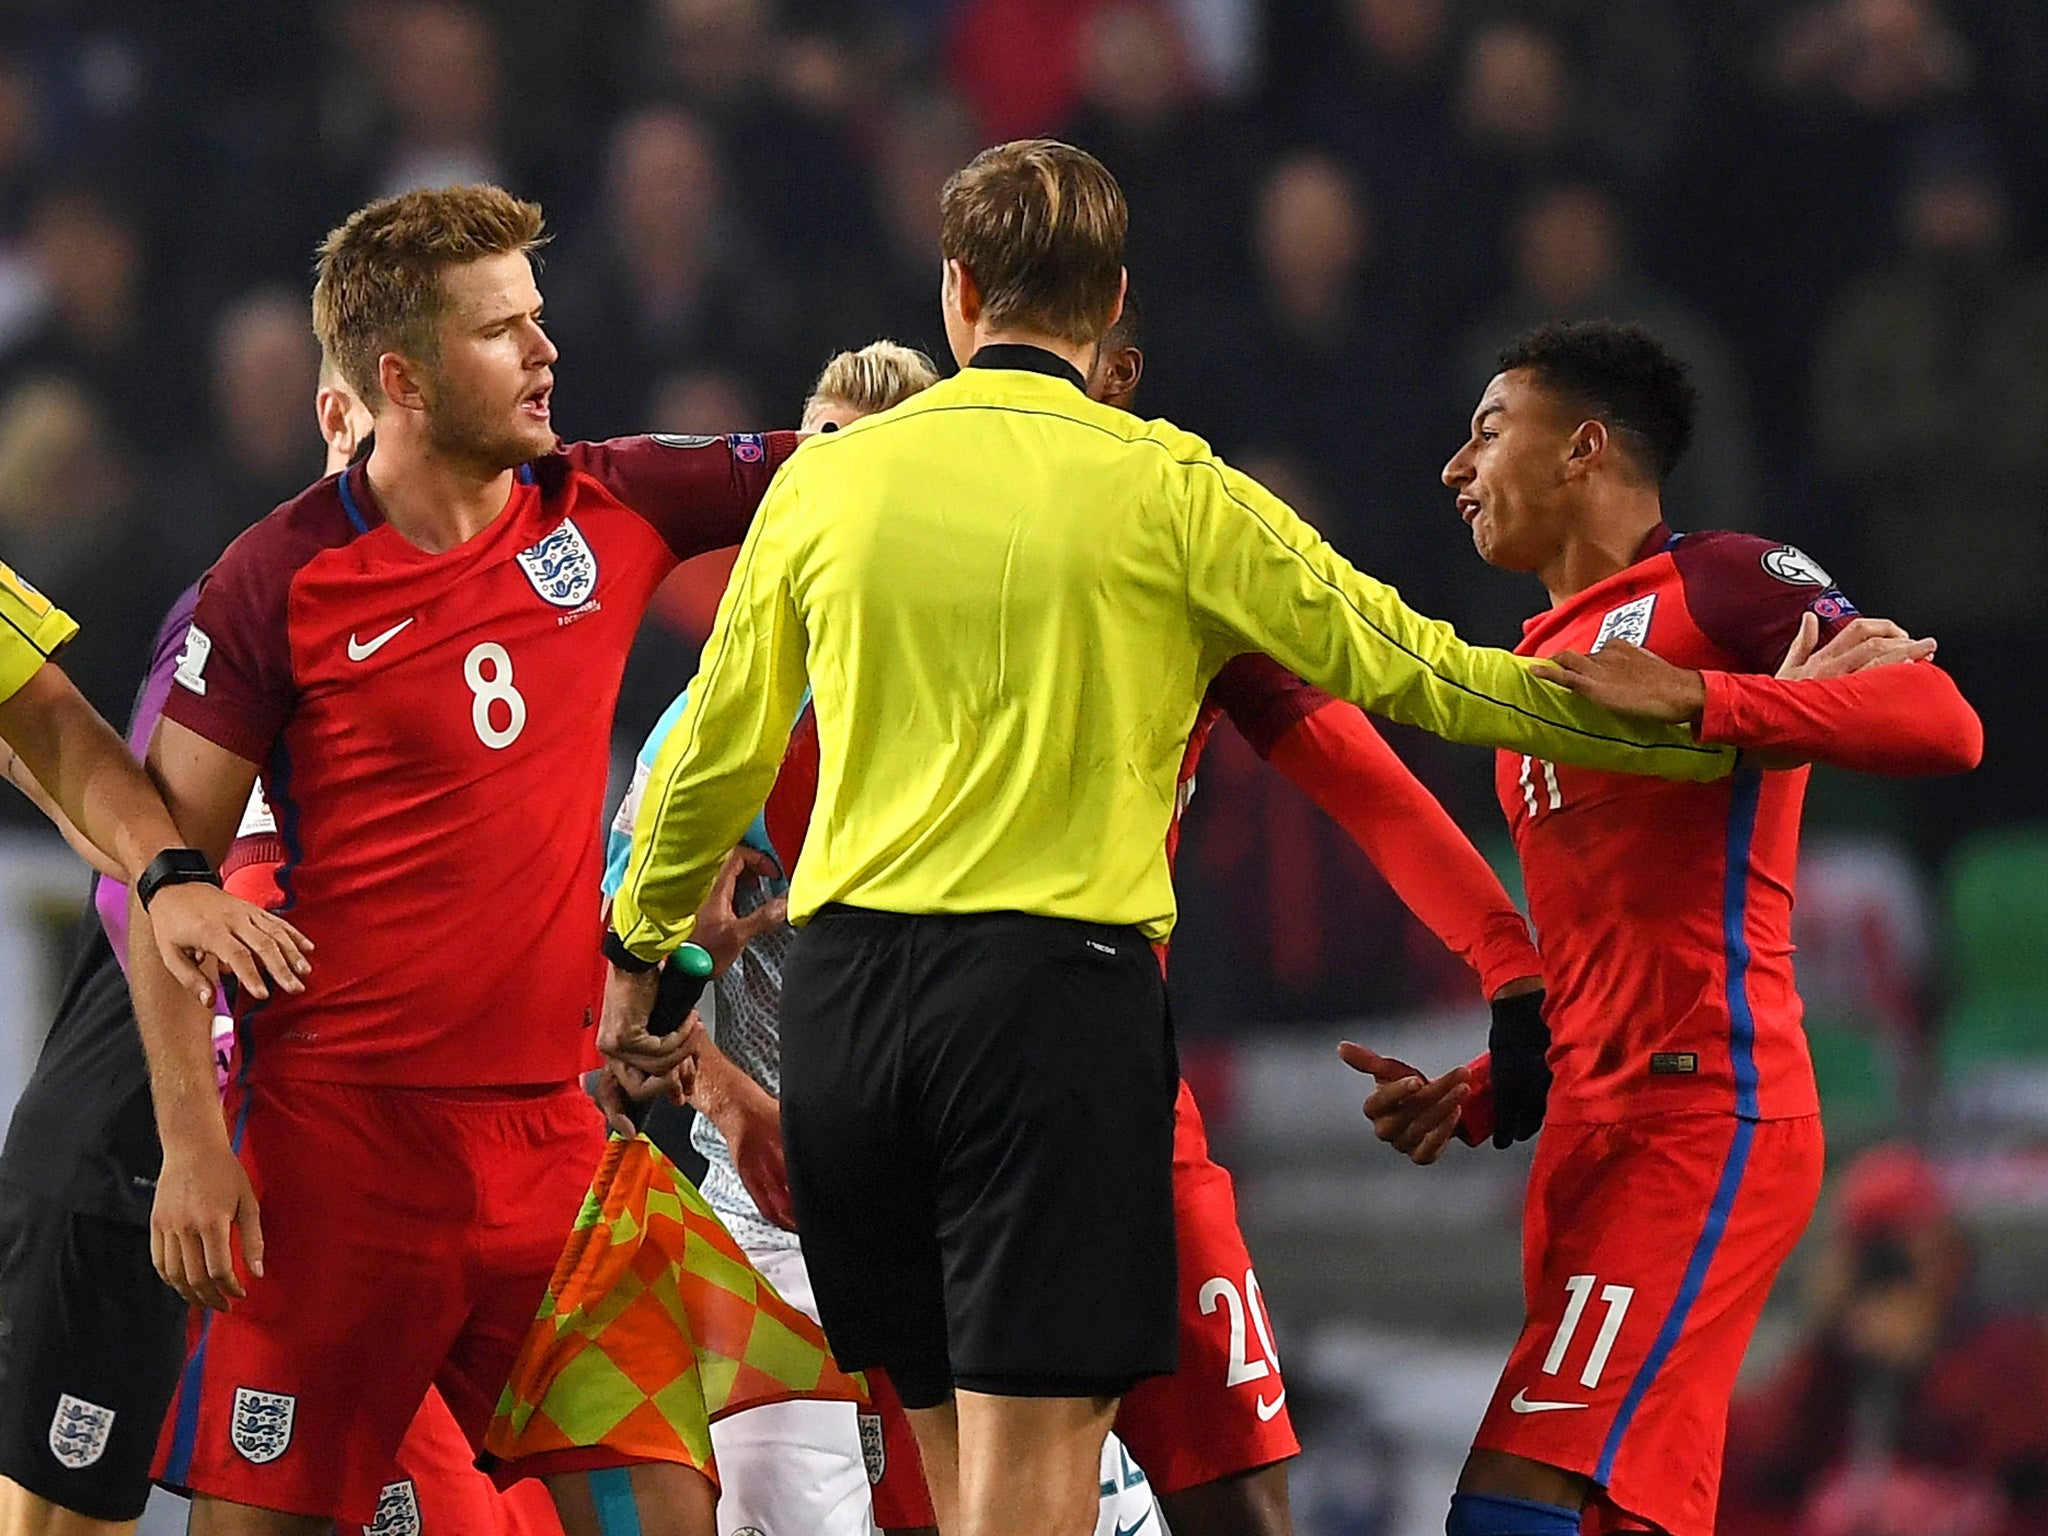 Lingard, right, was angered with Struna's treatment of Rashford